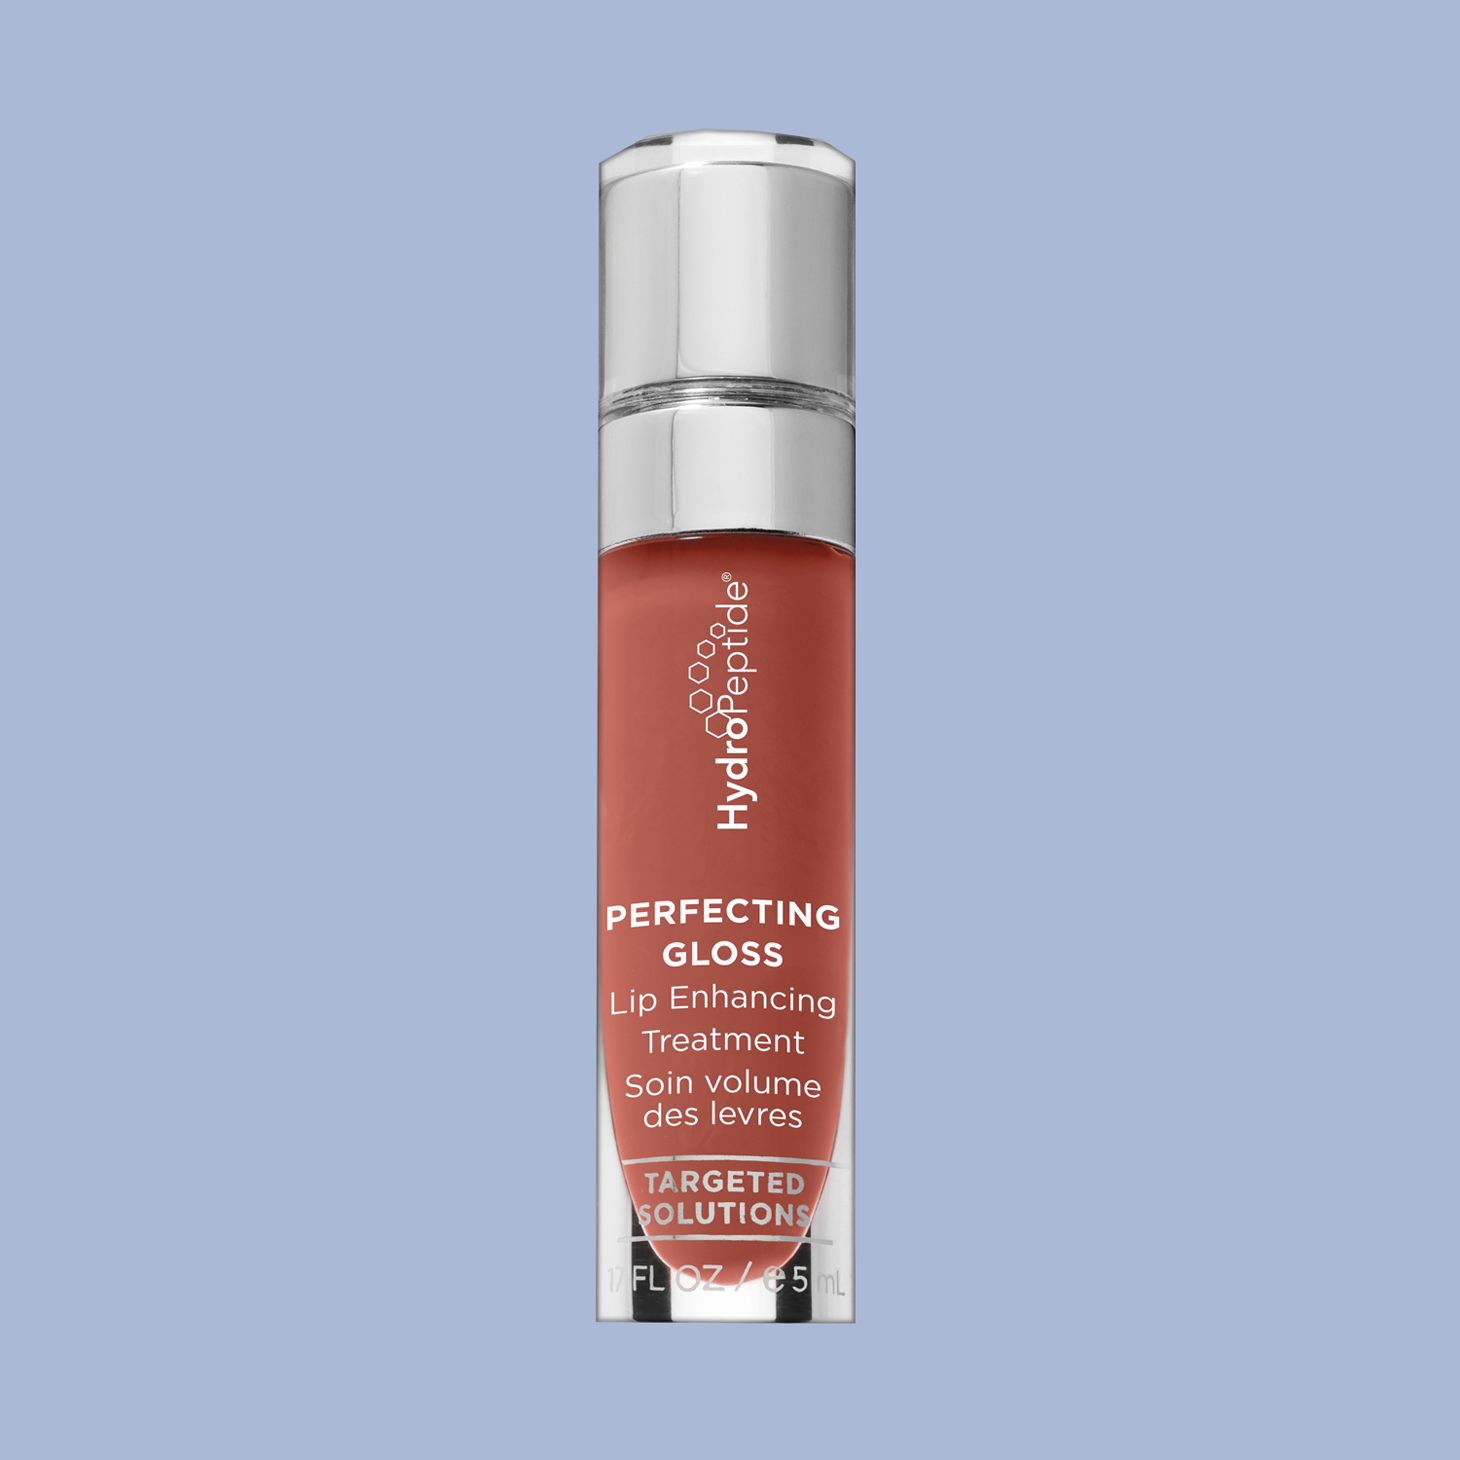 HPRSBPG-PerfectingGloss-Sunkissed1of2730x730_2xpx.png